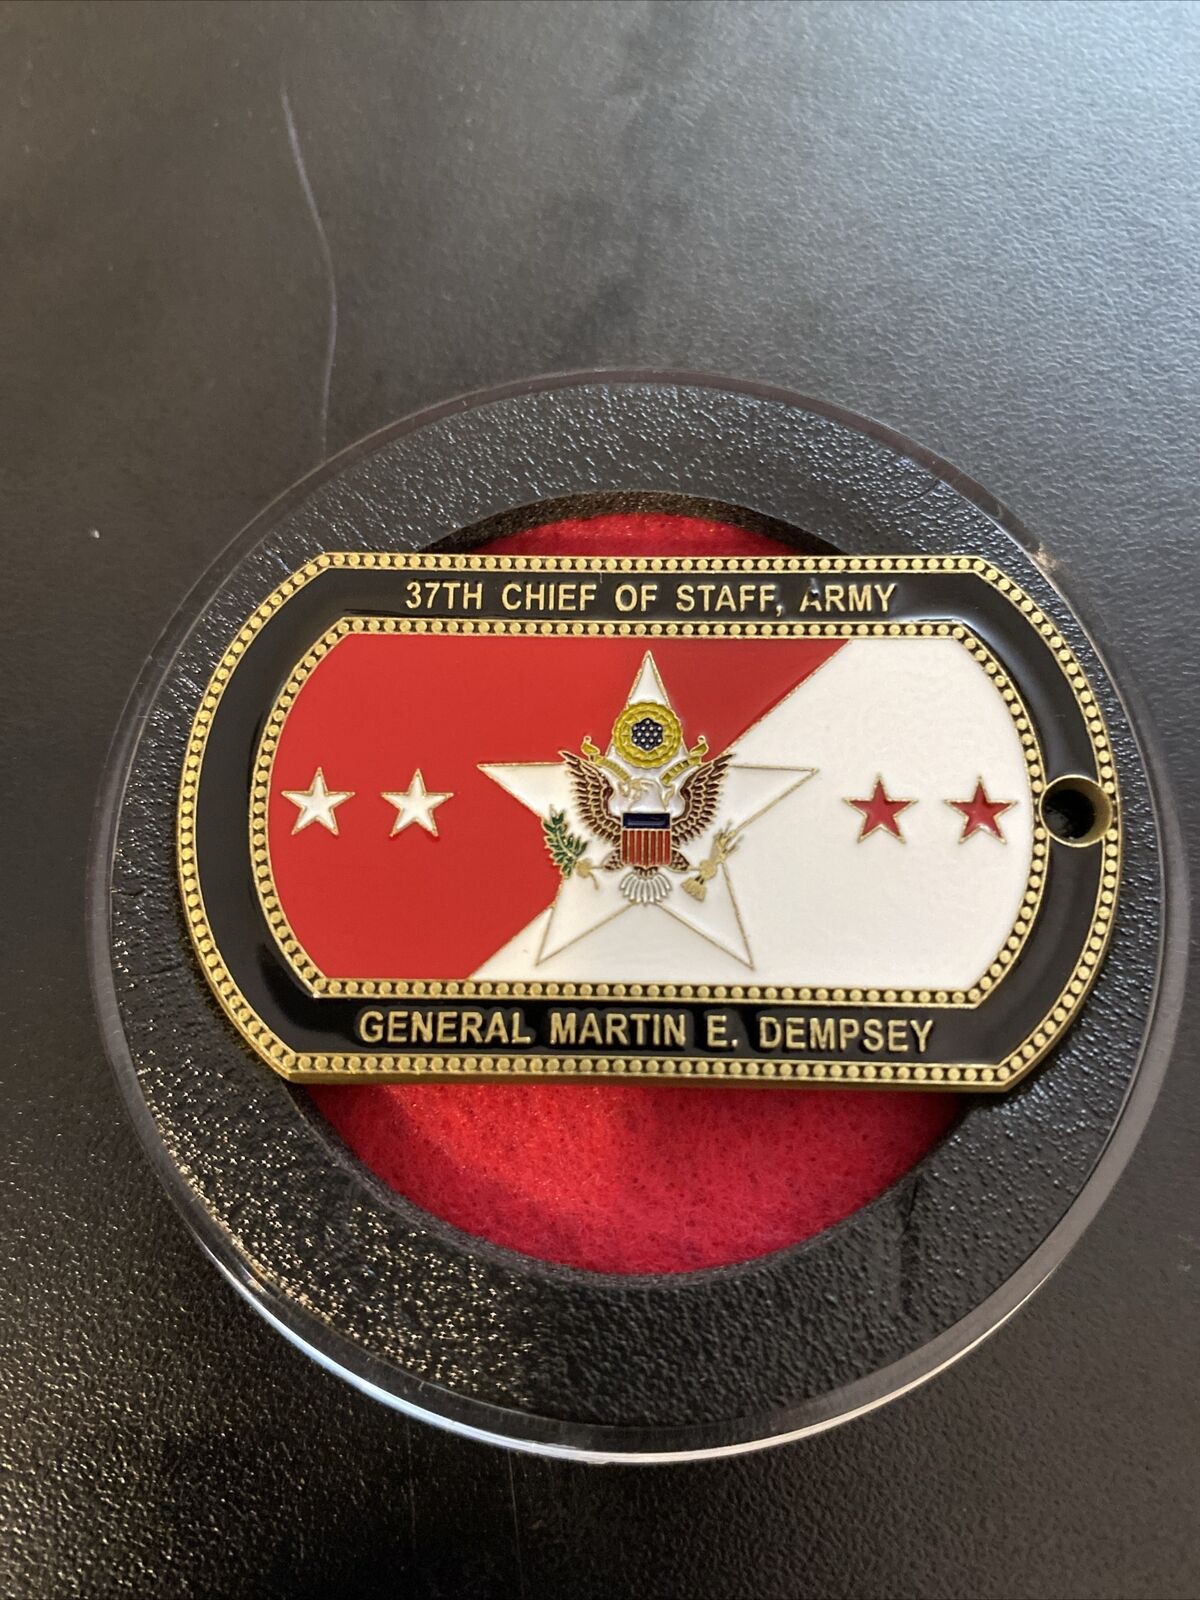 37th Chief Of Staff Army General Martin E. Dempsey Challenge Coin